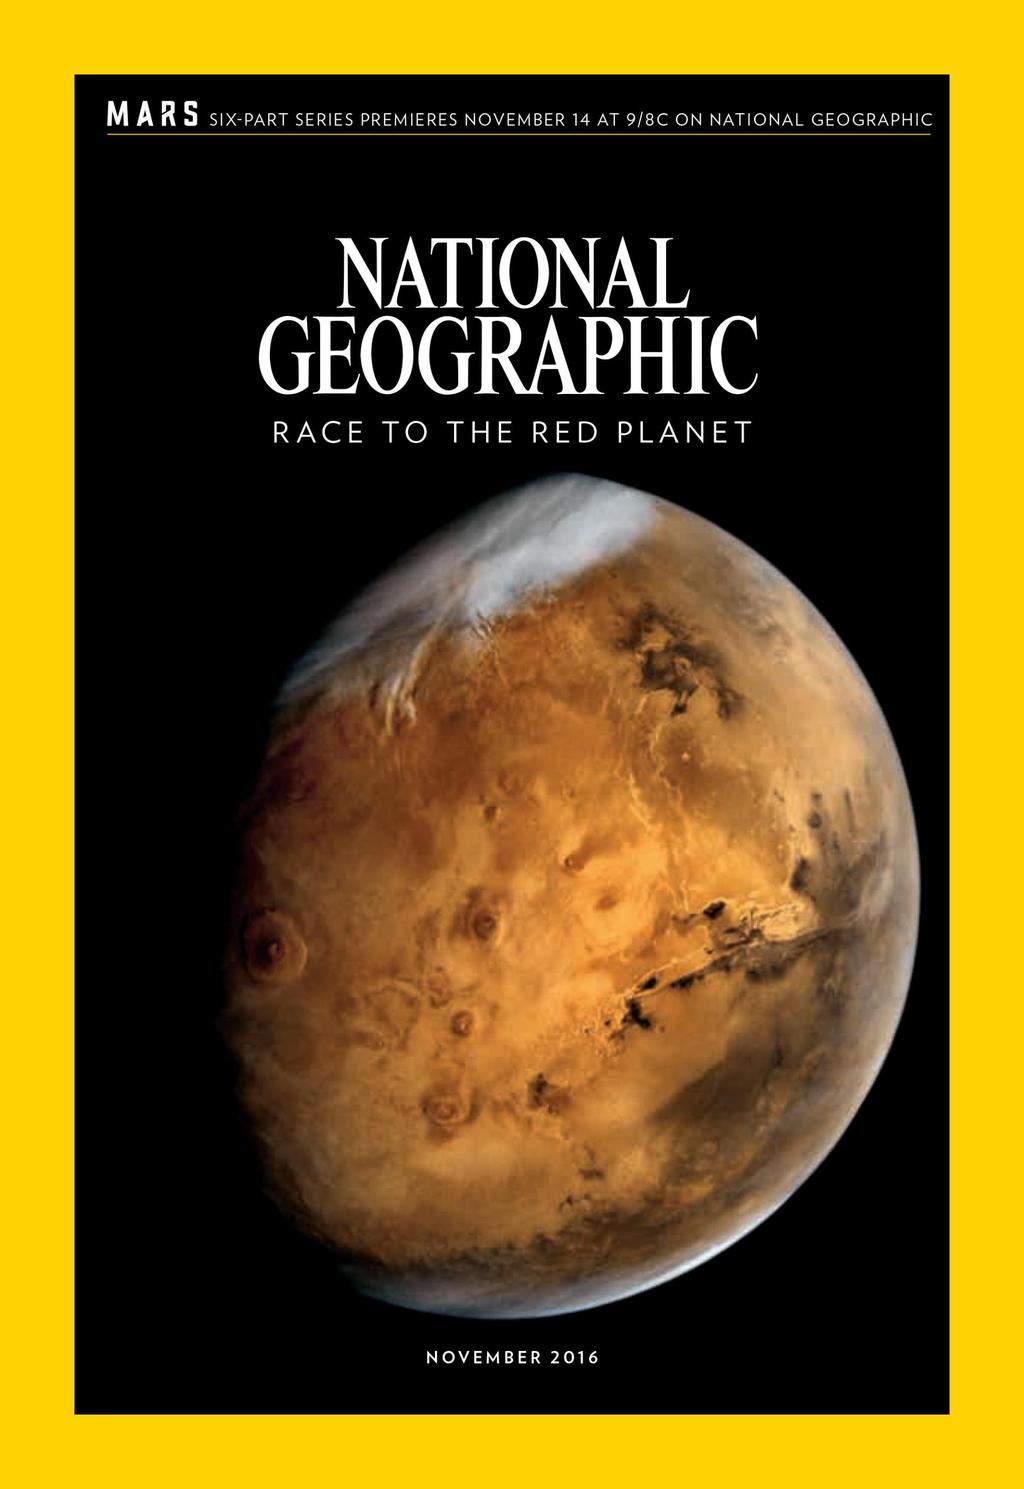 Analysis of NATIONAL GEOGRAPHIC National Geographic writes on a wide range of topics including geography, history, and world cultures as well sciences.